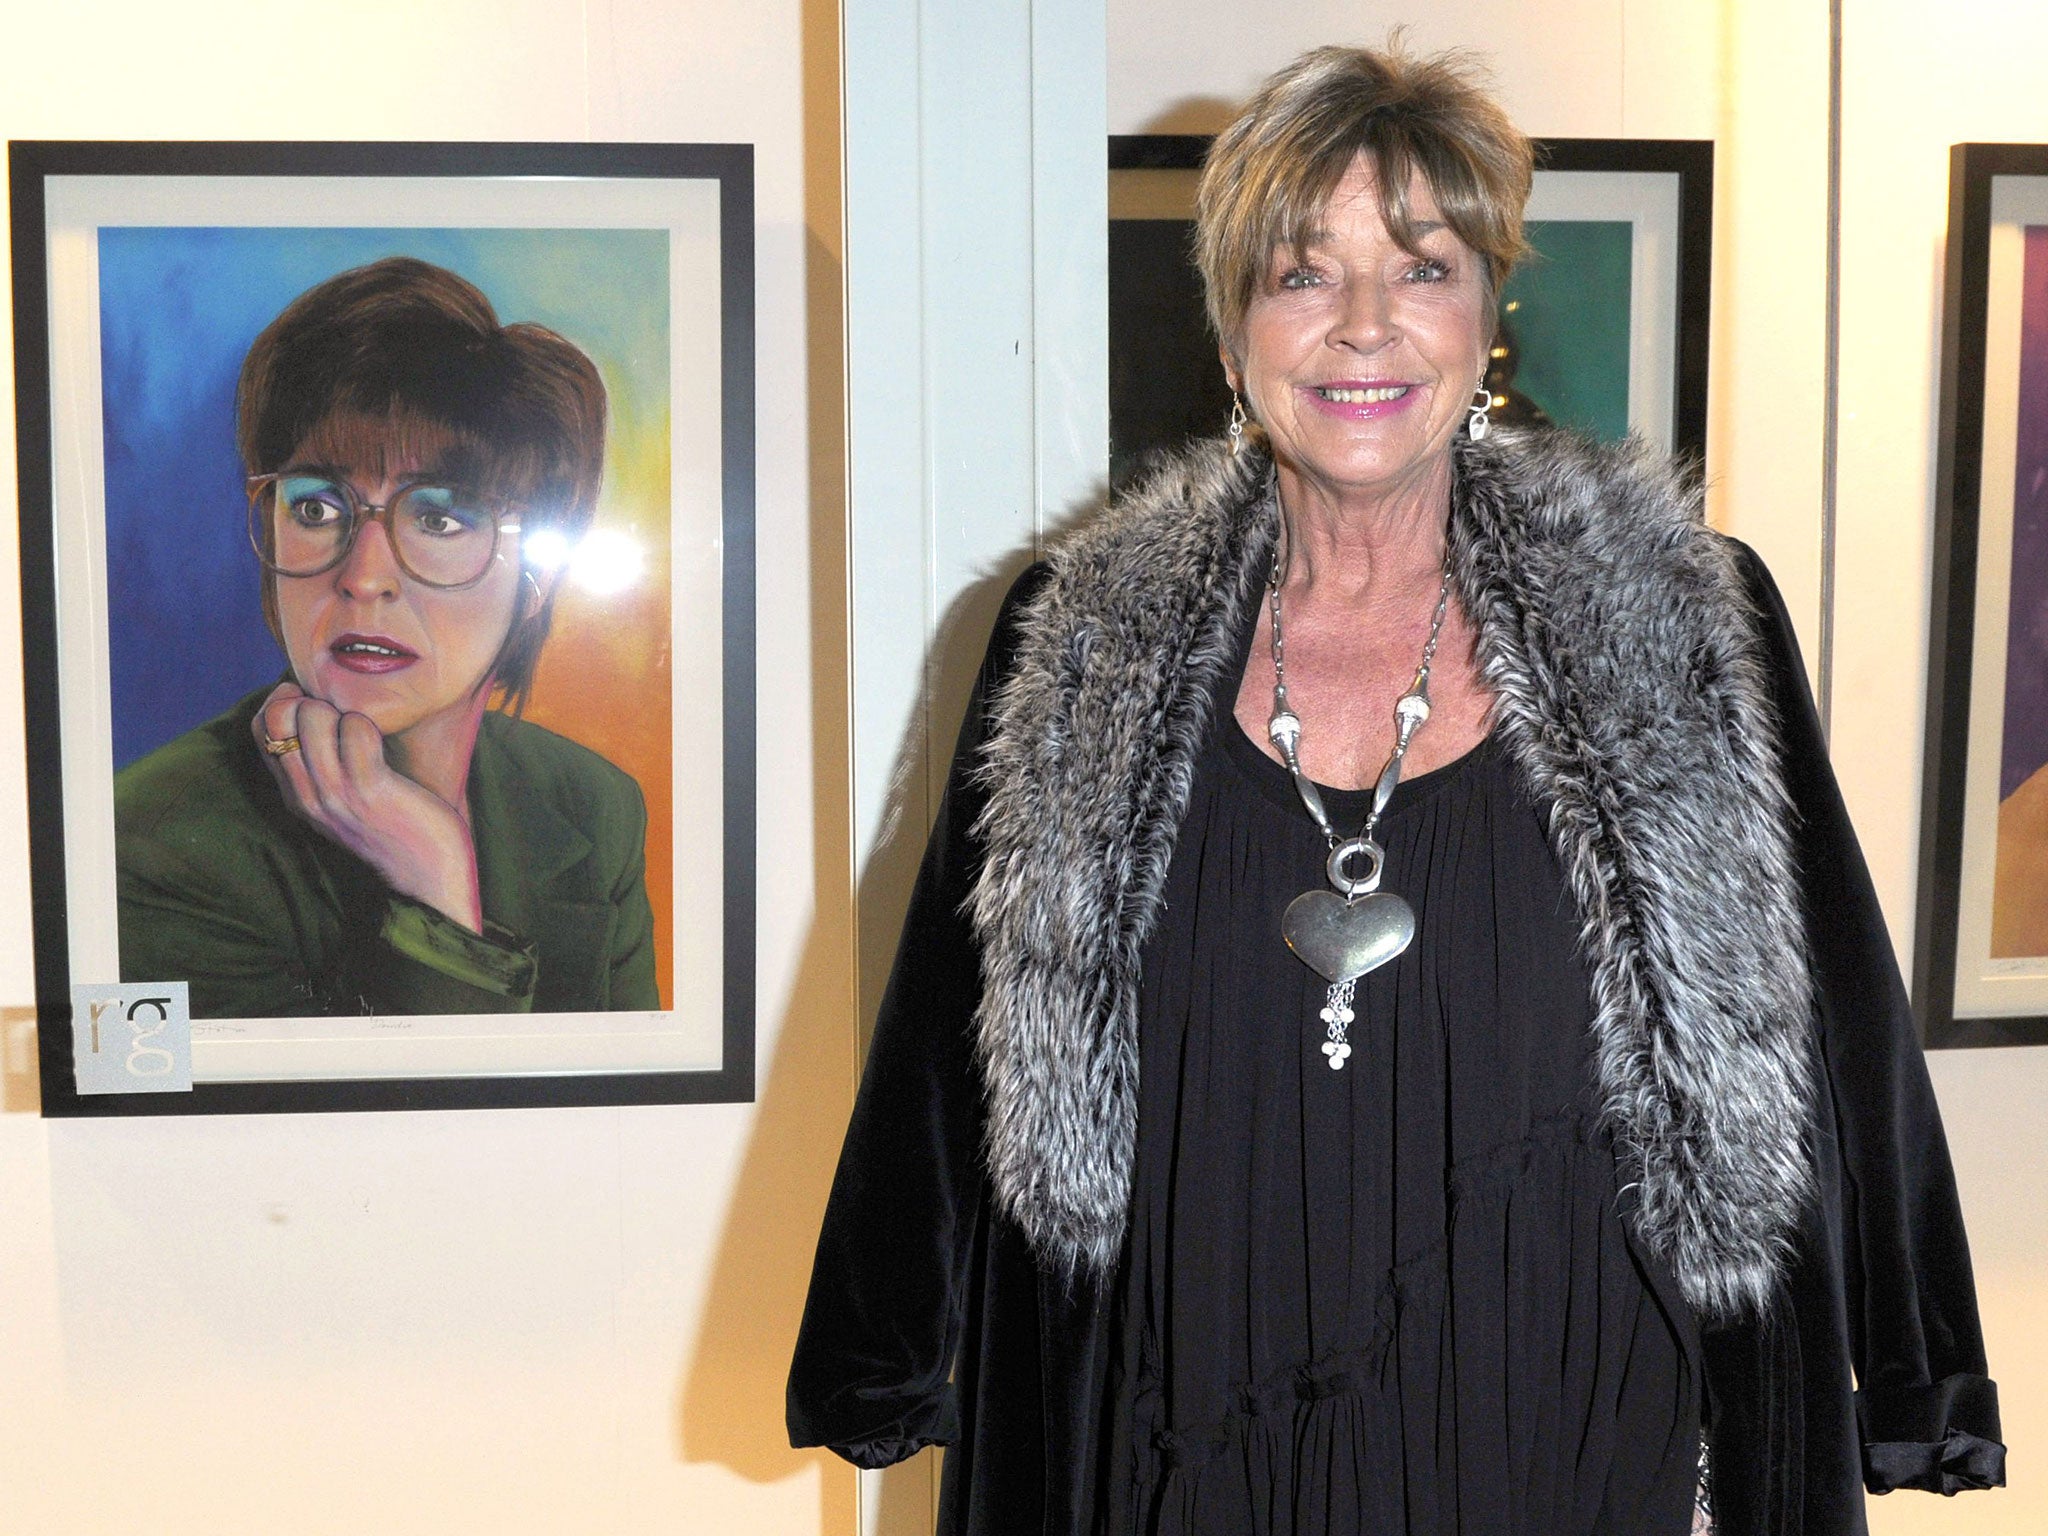 Anne Kirkbride with a portrait of a young Deirdre Barlow at The Richard Goodall Gallery, Manchester, on 2 December 2010